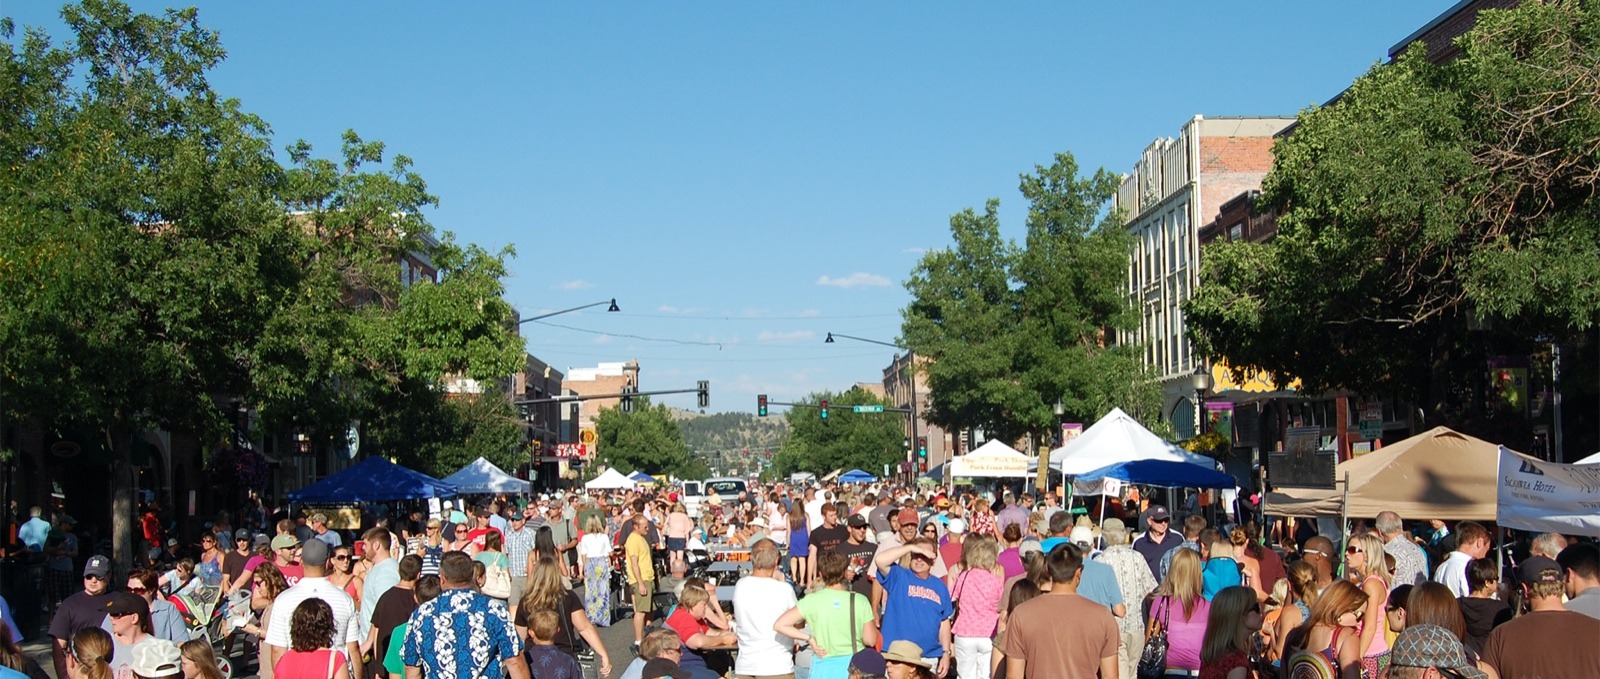 Bozeman residents love to come together and one of the highlights of summer is the annual Sweat Pea Festival, which is staged by a local non-profit. Here is a scene from Sweat Pea's Bite of Bozeman early in August that highlights a week of festivities.